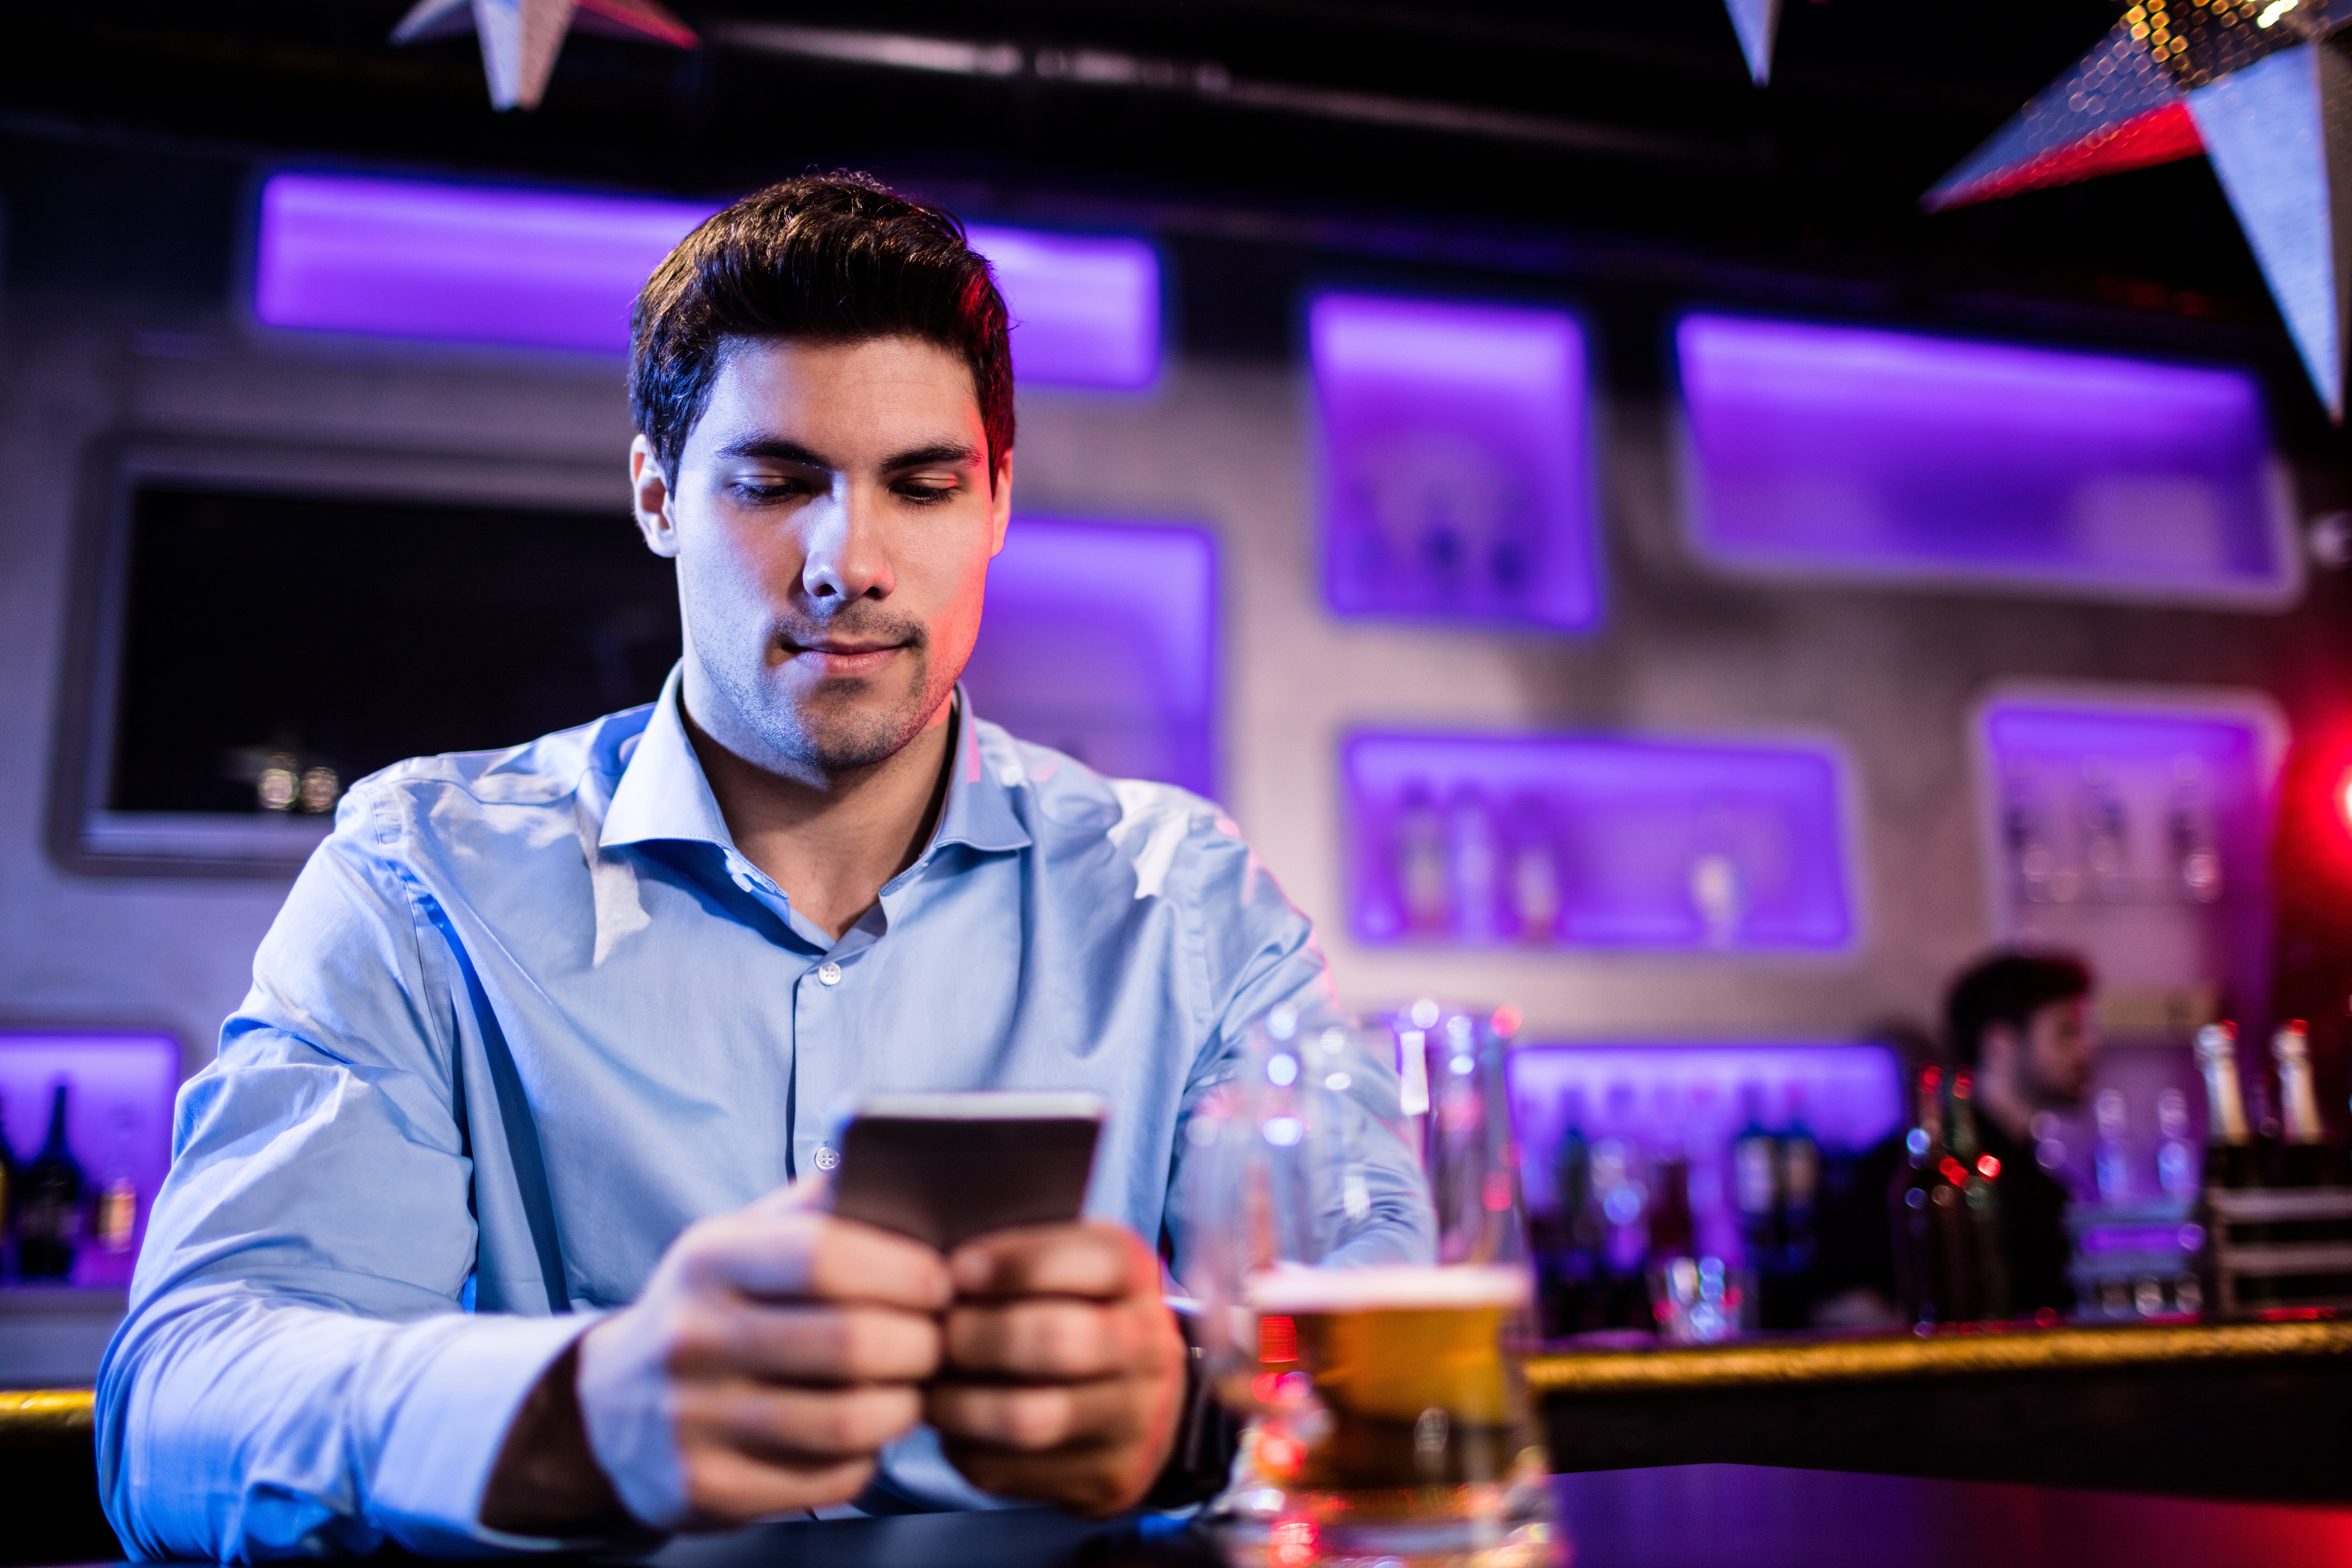 SMS Marketing for Bars and Nightclubs